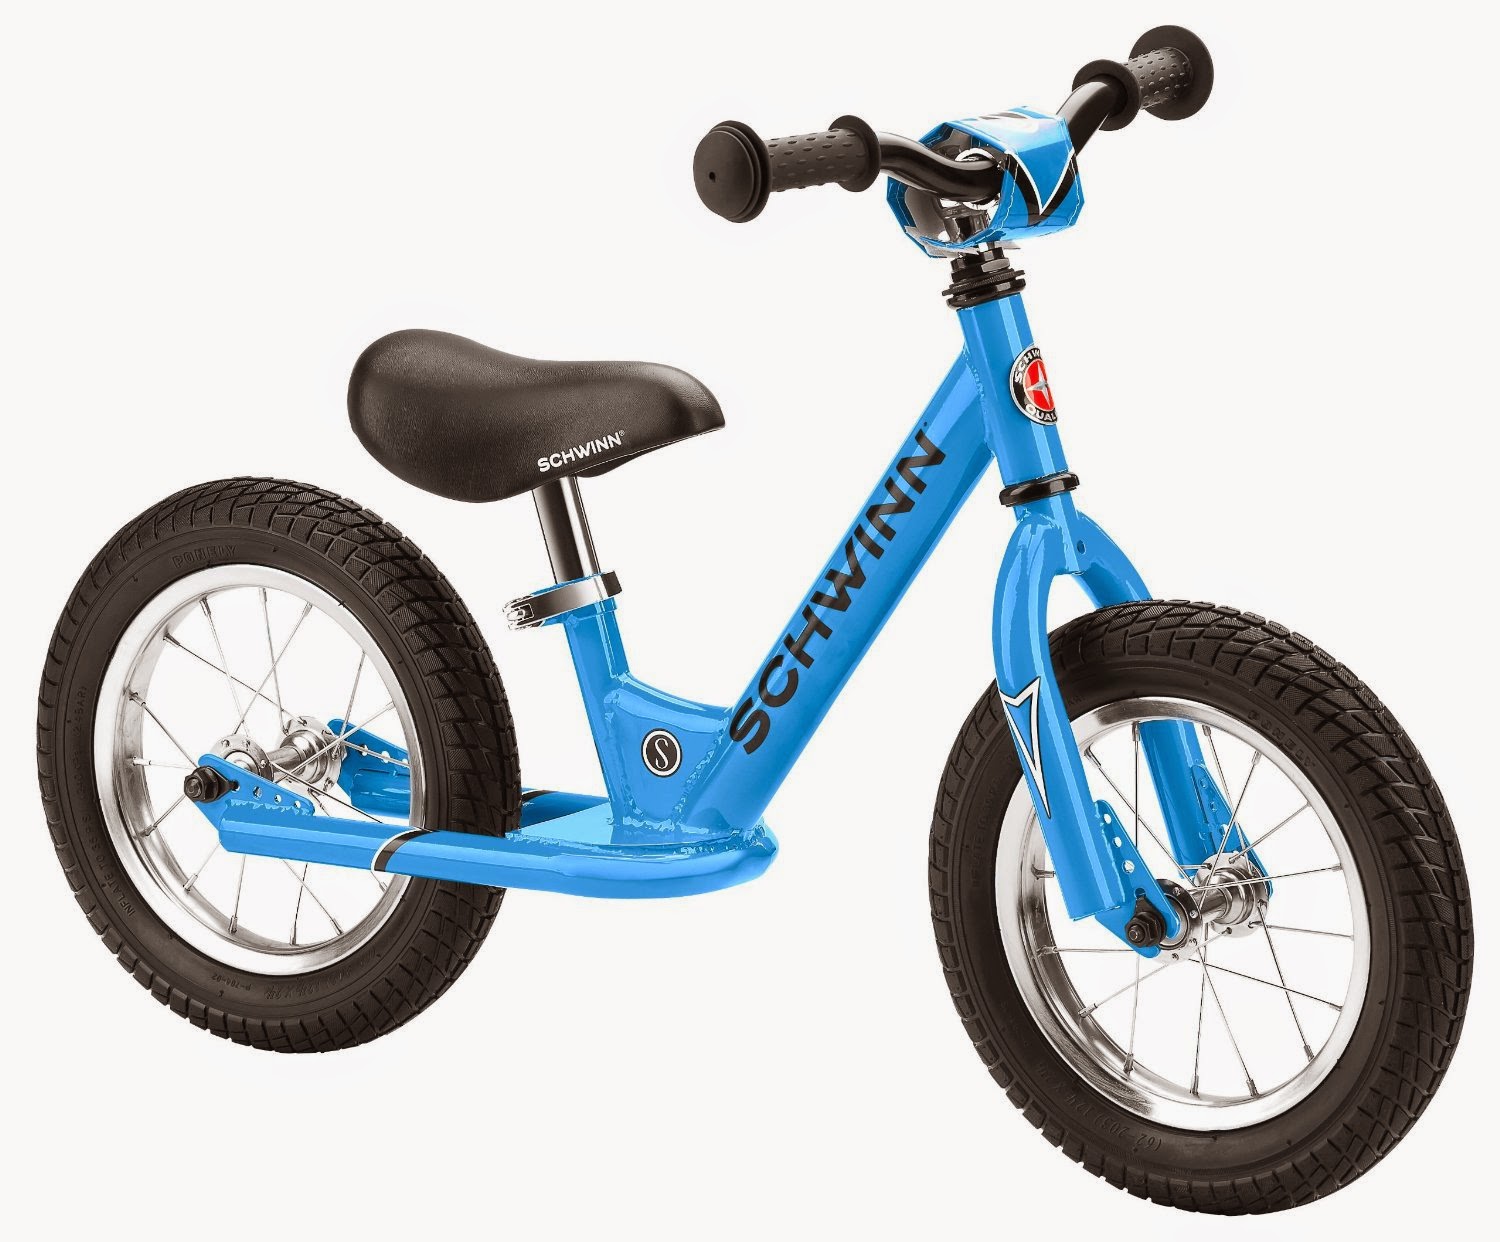 Schwinn 12" Balance Bike in Blue, picture, review, with unique foot-to-floor frame design, teaches balance, steering and control